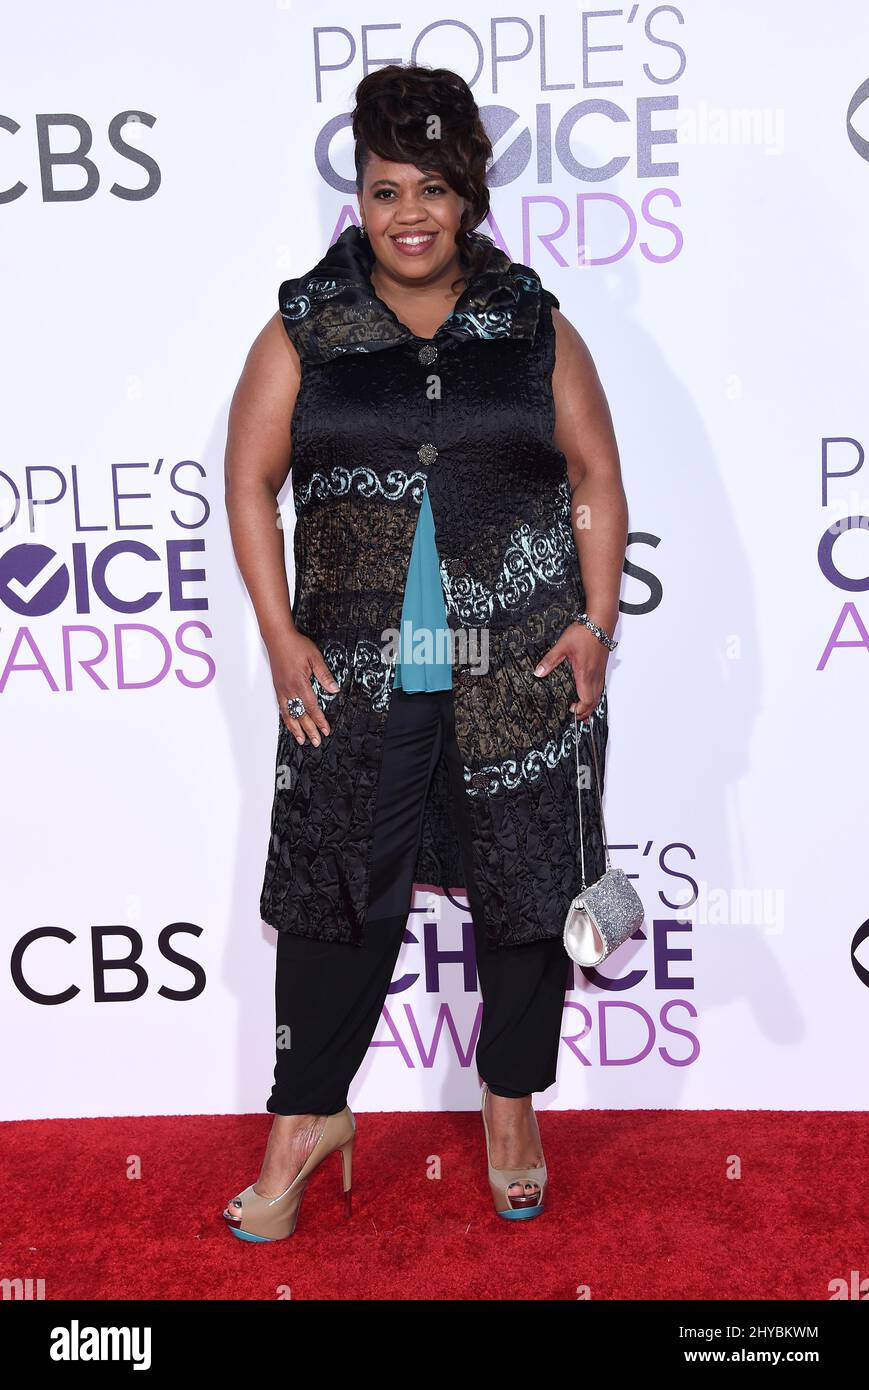 Chandra Wilson nimmt an den People's Choice Awards 2017 im Microsoft Theater L.A. Teil Live in LSO Angeles, USA Stockfoto